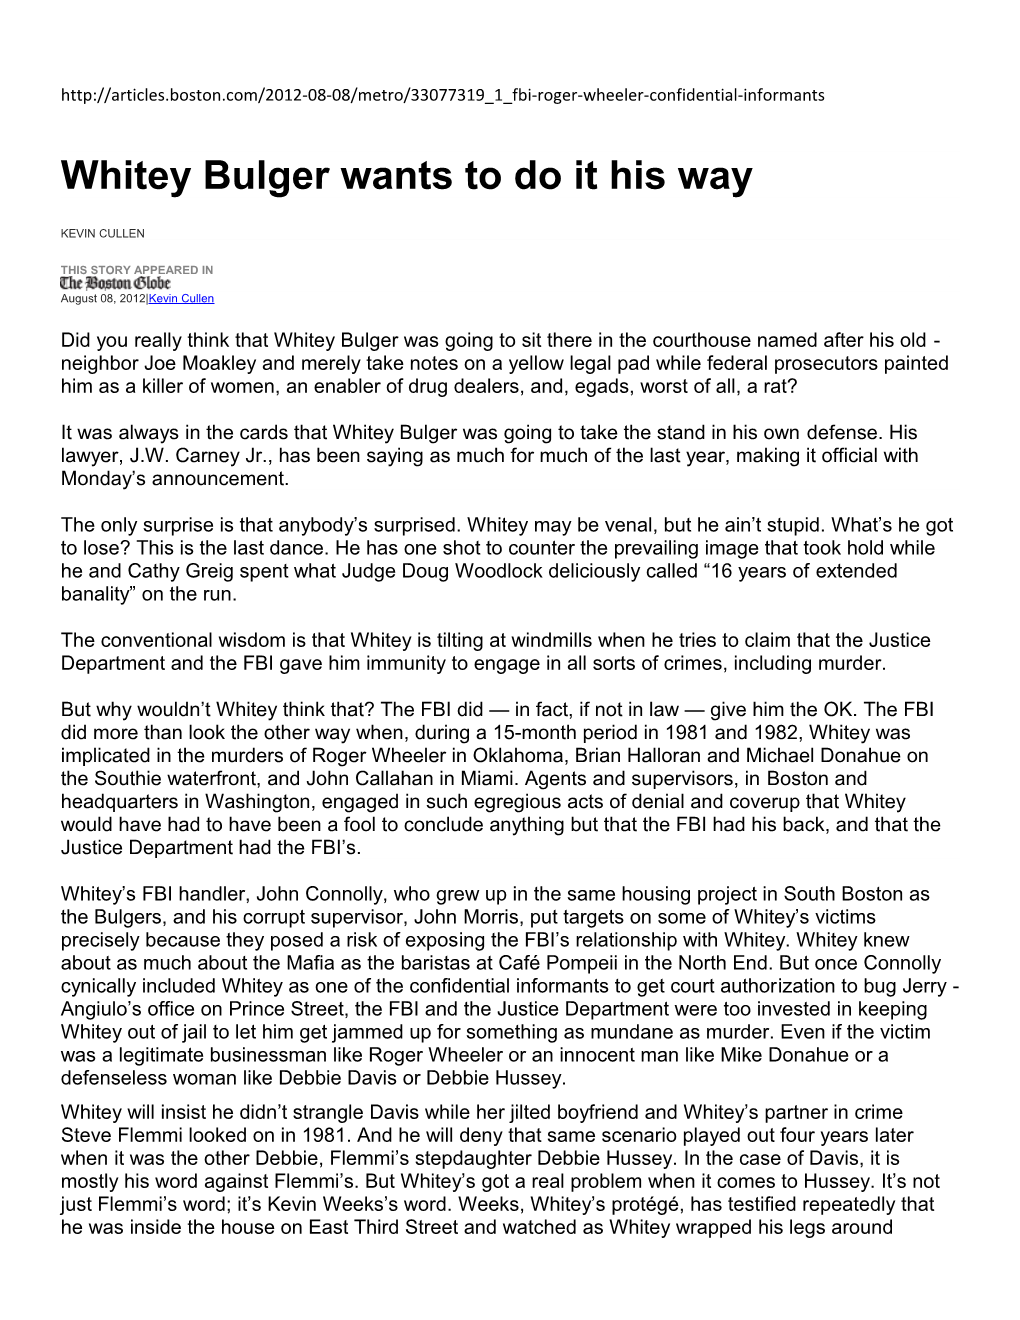 Whitey Bulger Wants to Do It His Way